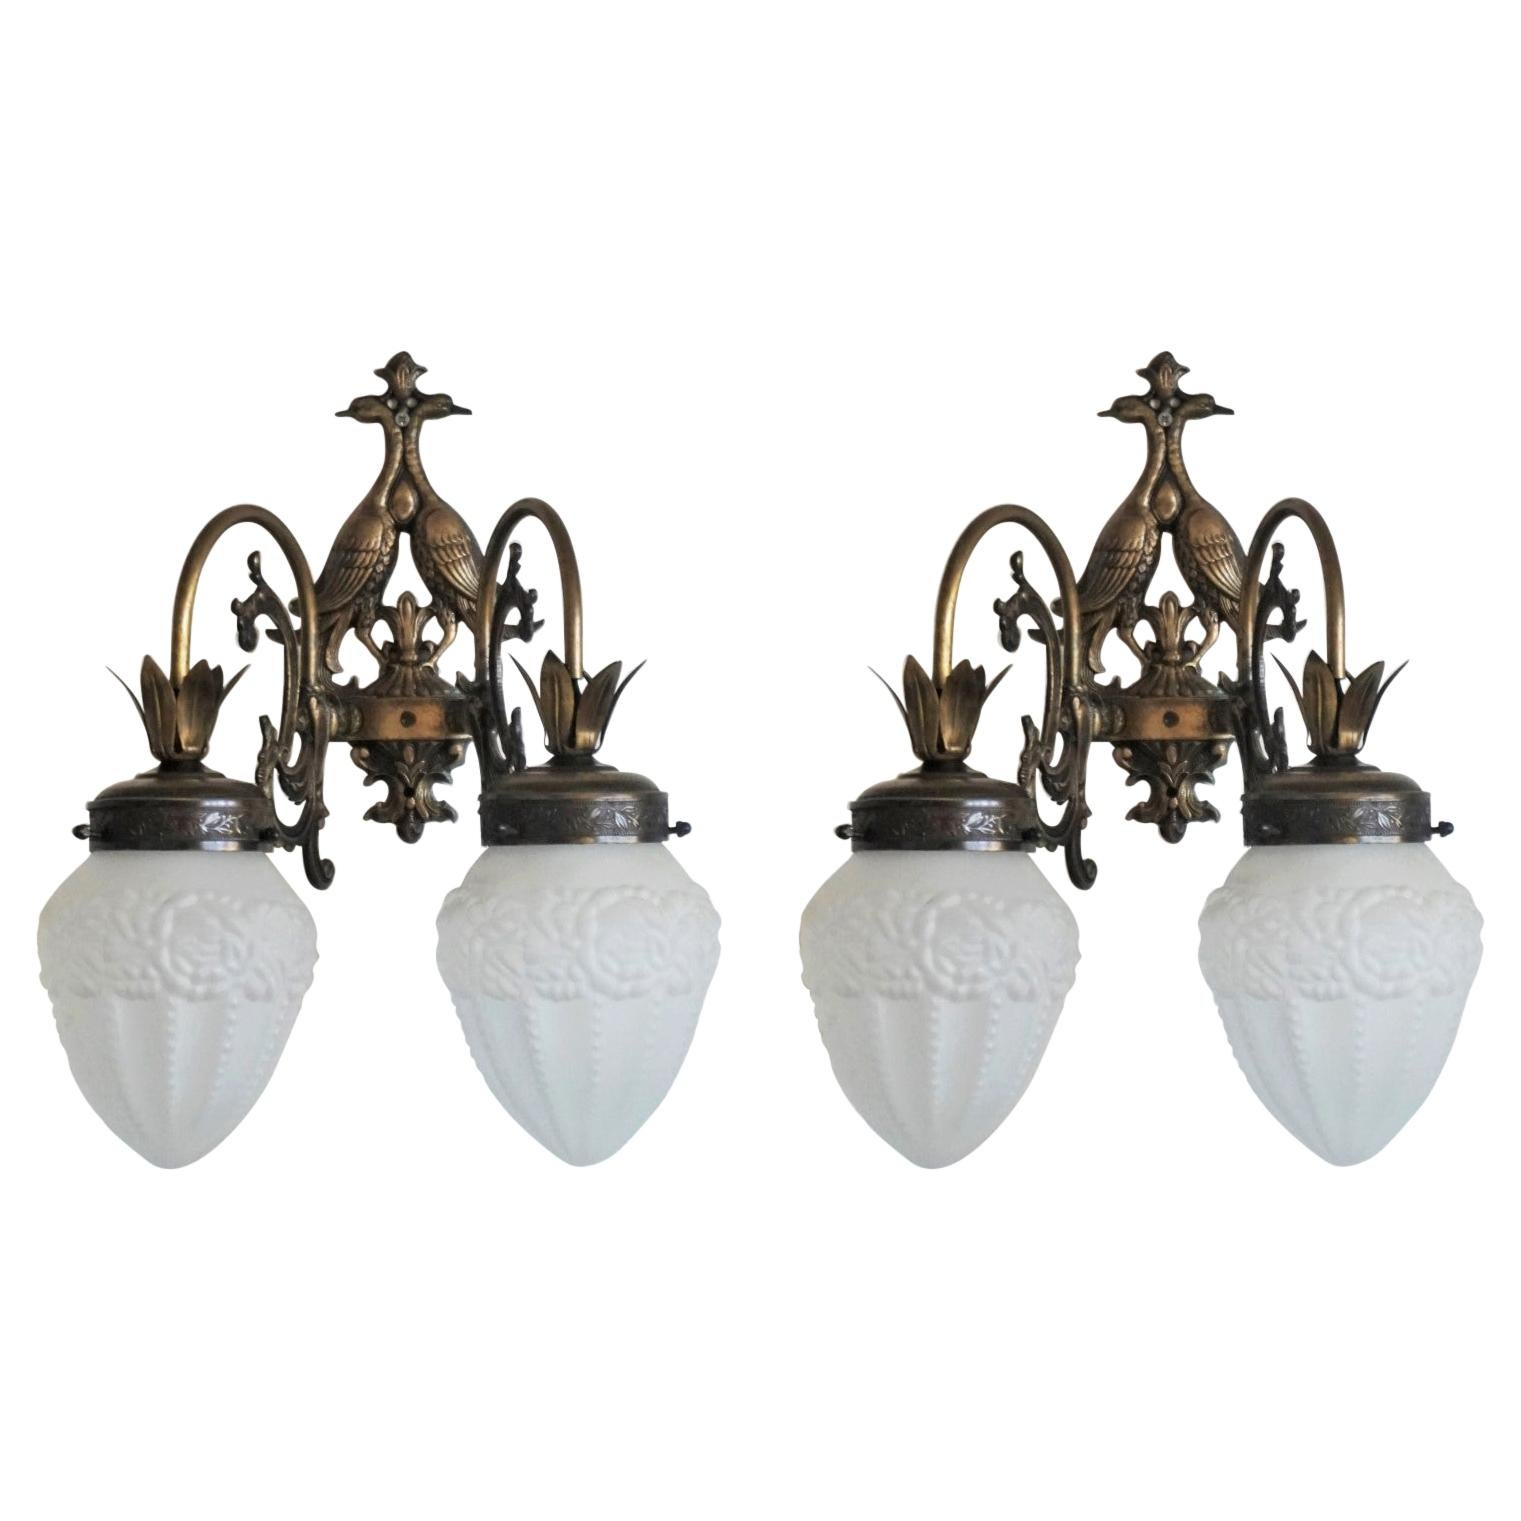 Pair of French Wrought Iron and Glass Two-Arm Wall Sconces Indoor or Outdoor Use